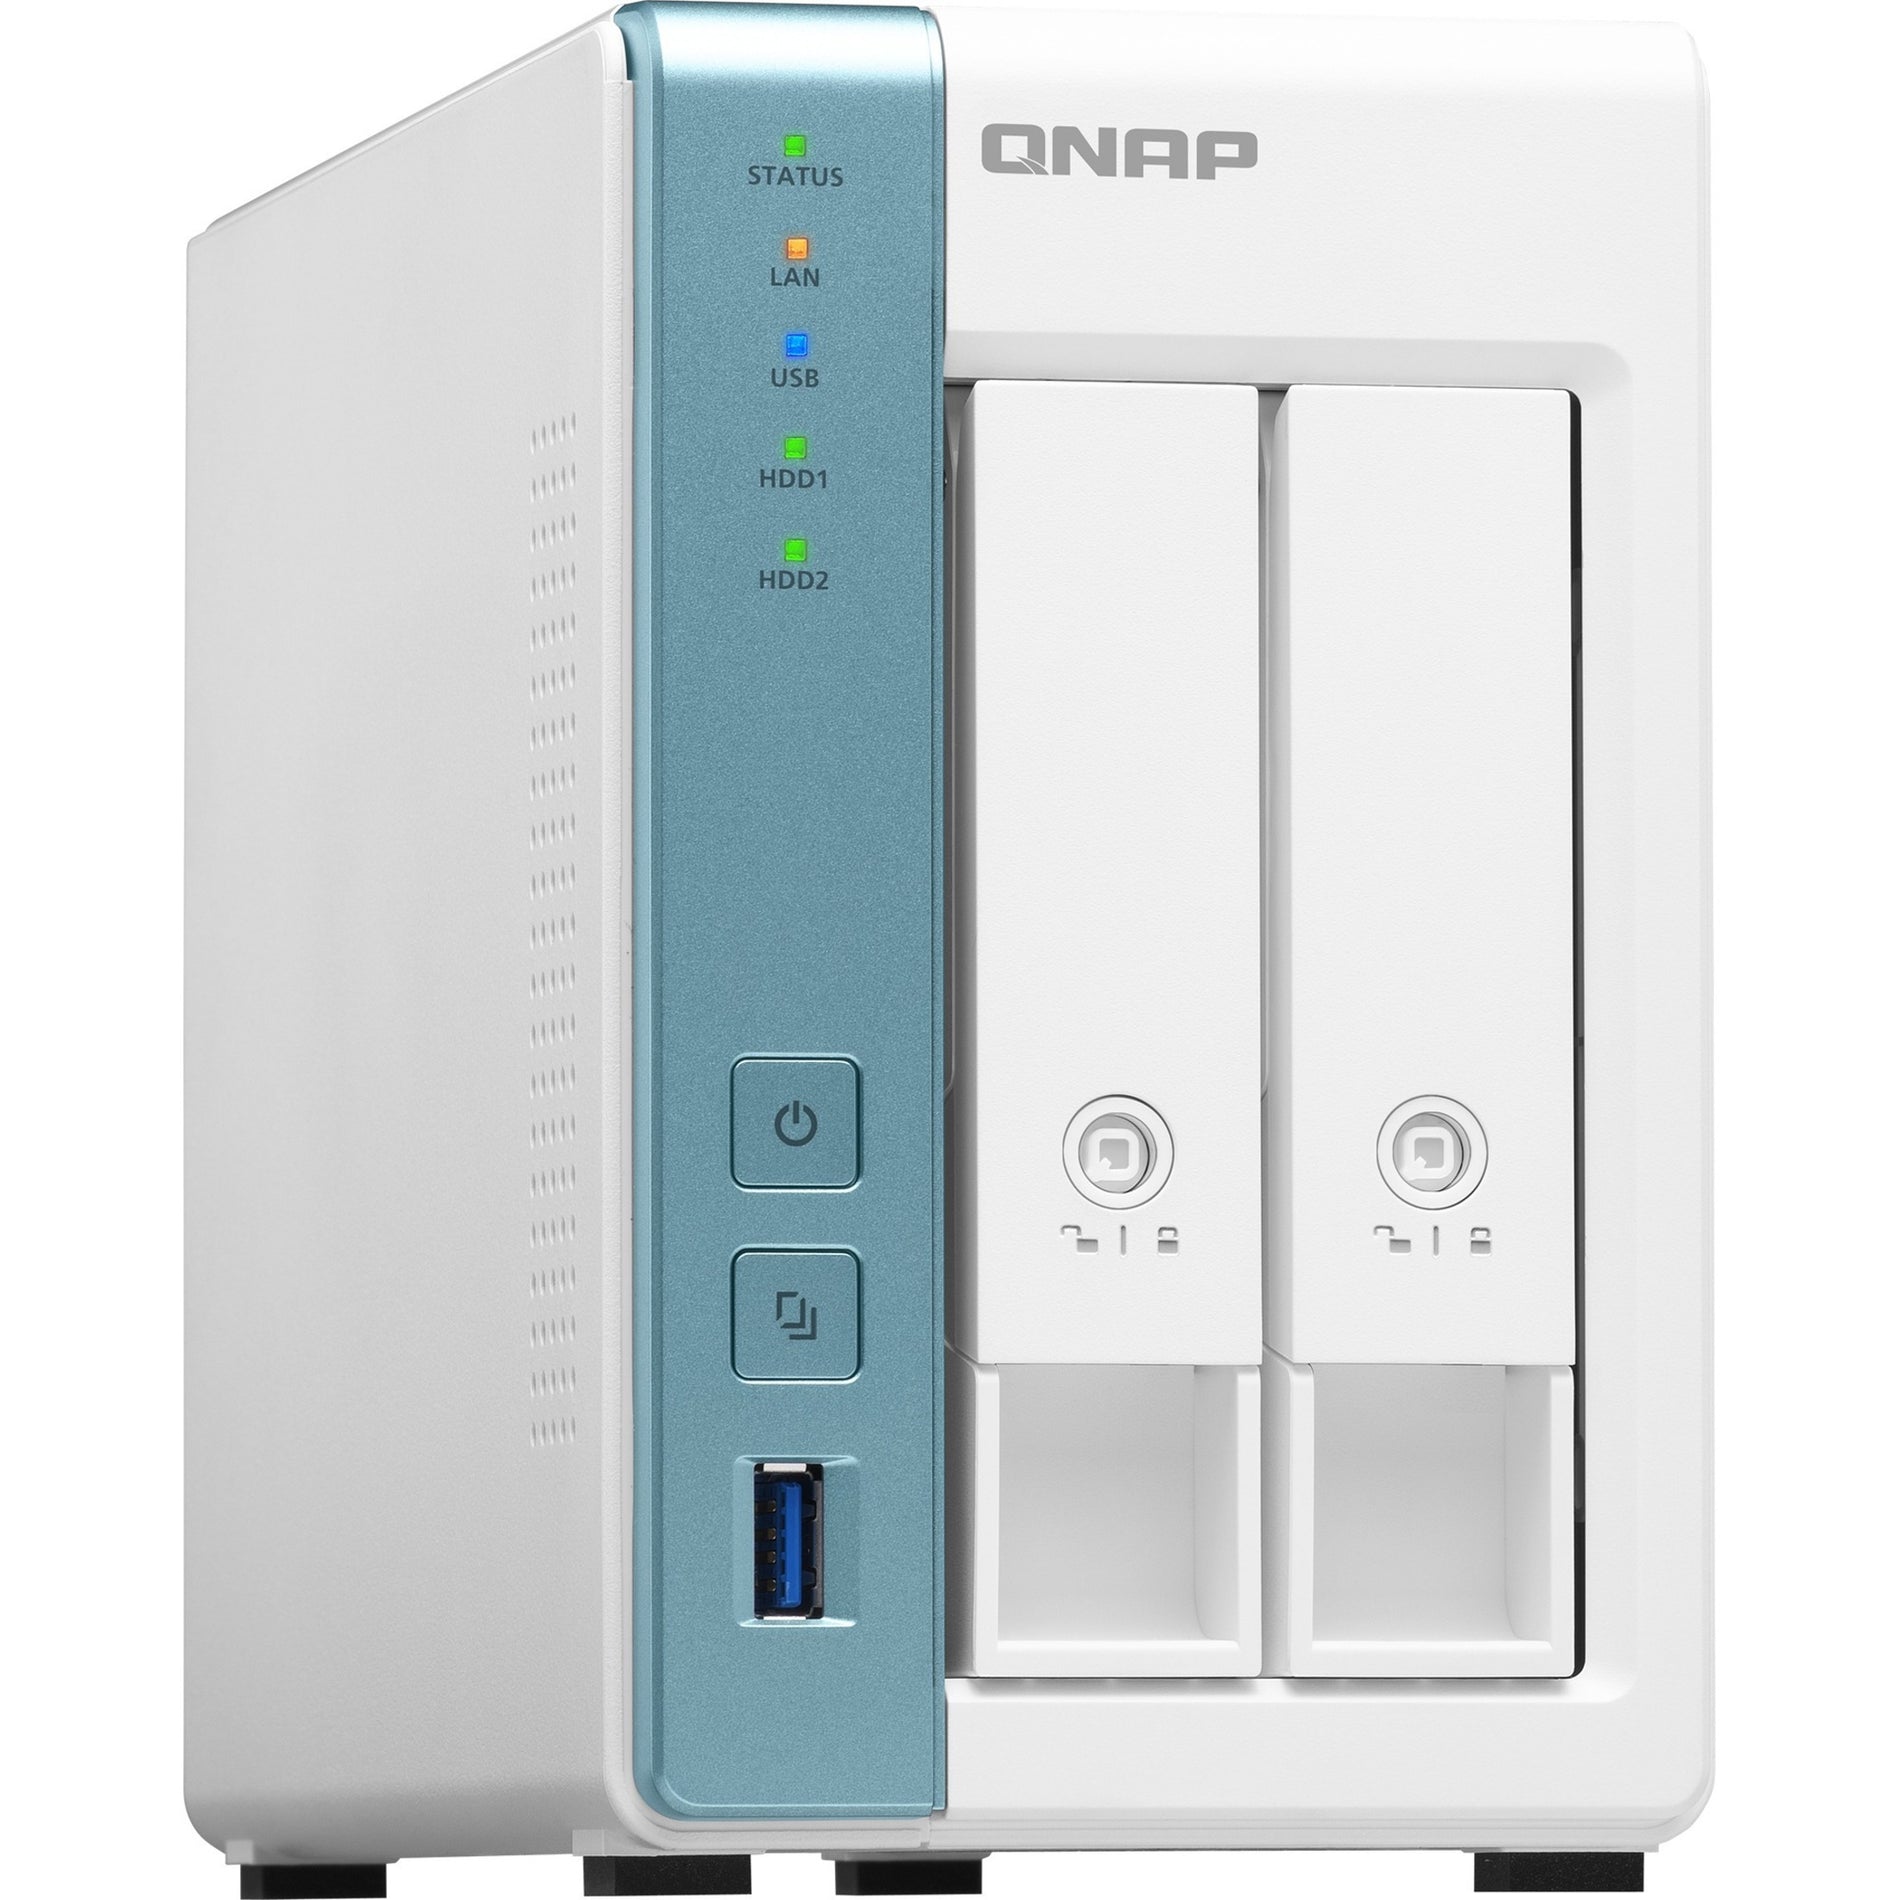 QNAP TS-231P3-4G-US Quad-core 1.7GHz NAS with 2.5GbE and Feature-rich Applications for Home & Office